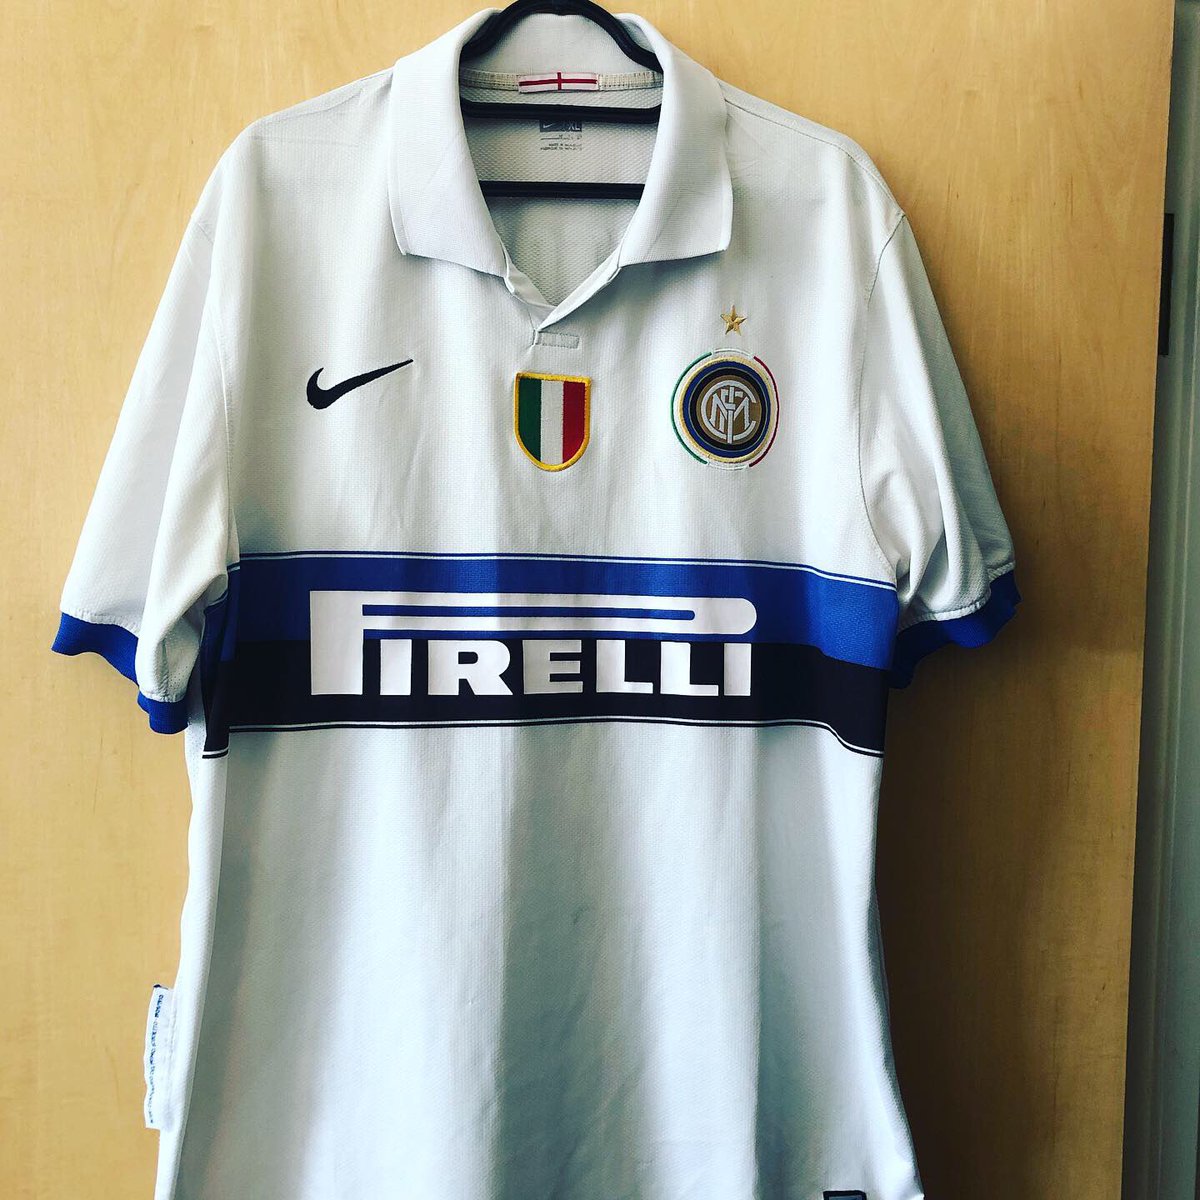 . @InterAway Kit, 2009/10 @nikePersonalised:  @setoo9Right, today’s the  #MilanDerby, Inter is top of the league, time to take out this amulet, the away kit from the season when we won the treble Whichever way it goes, Forza Inter #FootballShirtCollection  #ClassicFootballShirts